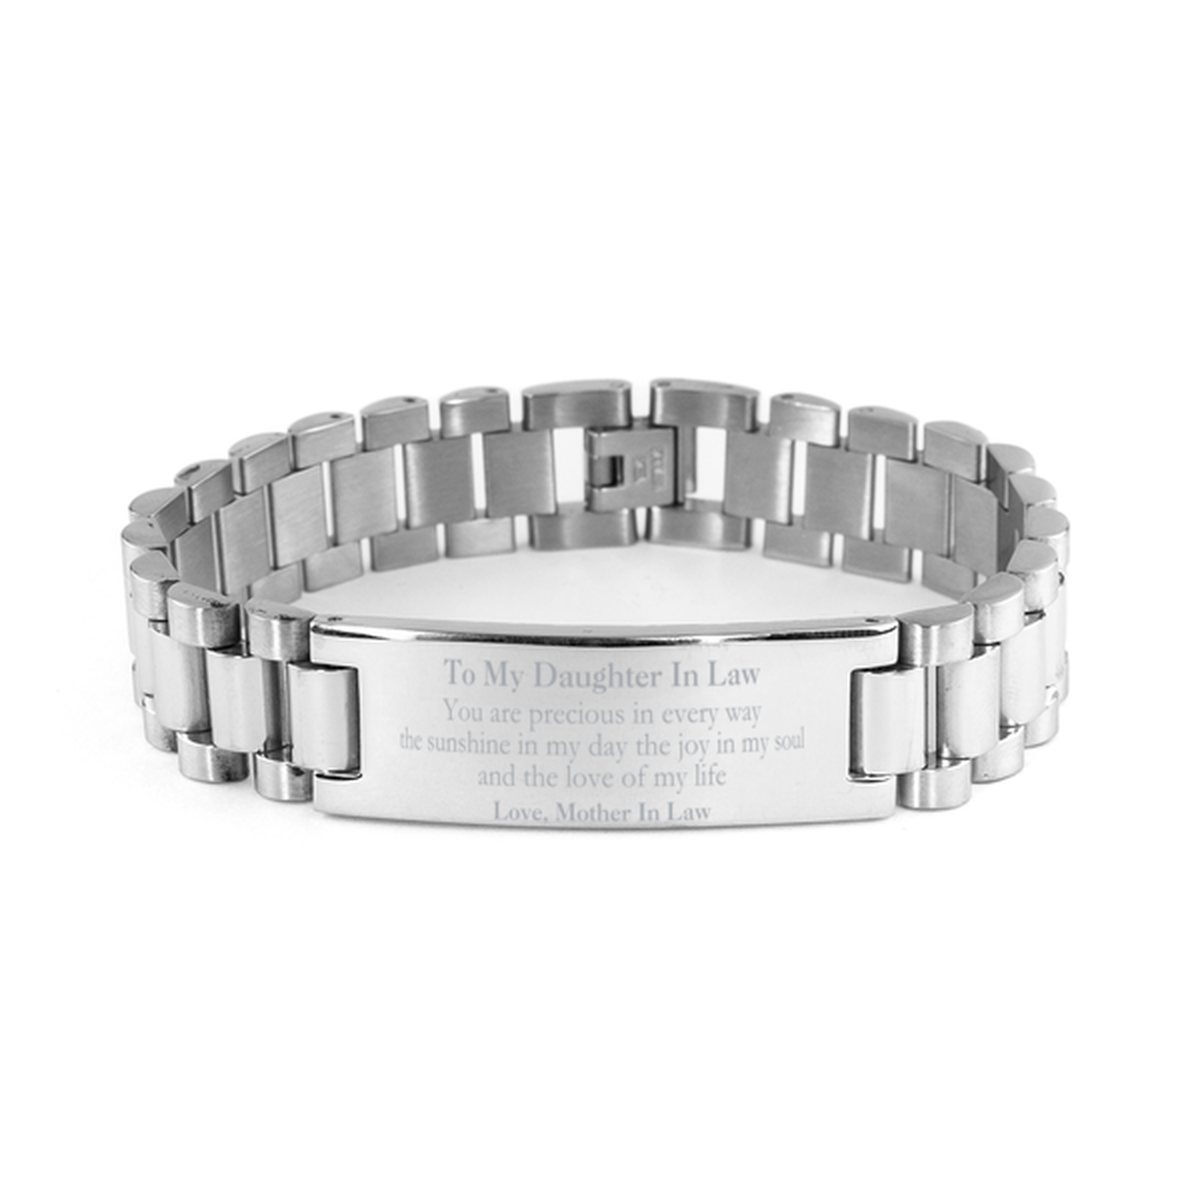 Graduation Gifts for Daughter In Law Ladder Stainless Steel Bracelet Present from Mother In Law, Christmas Daughter In Law Birthday Gifts Daughter In Law You are precious in every way the sunshine in my day. Love, Mother In Law